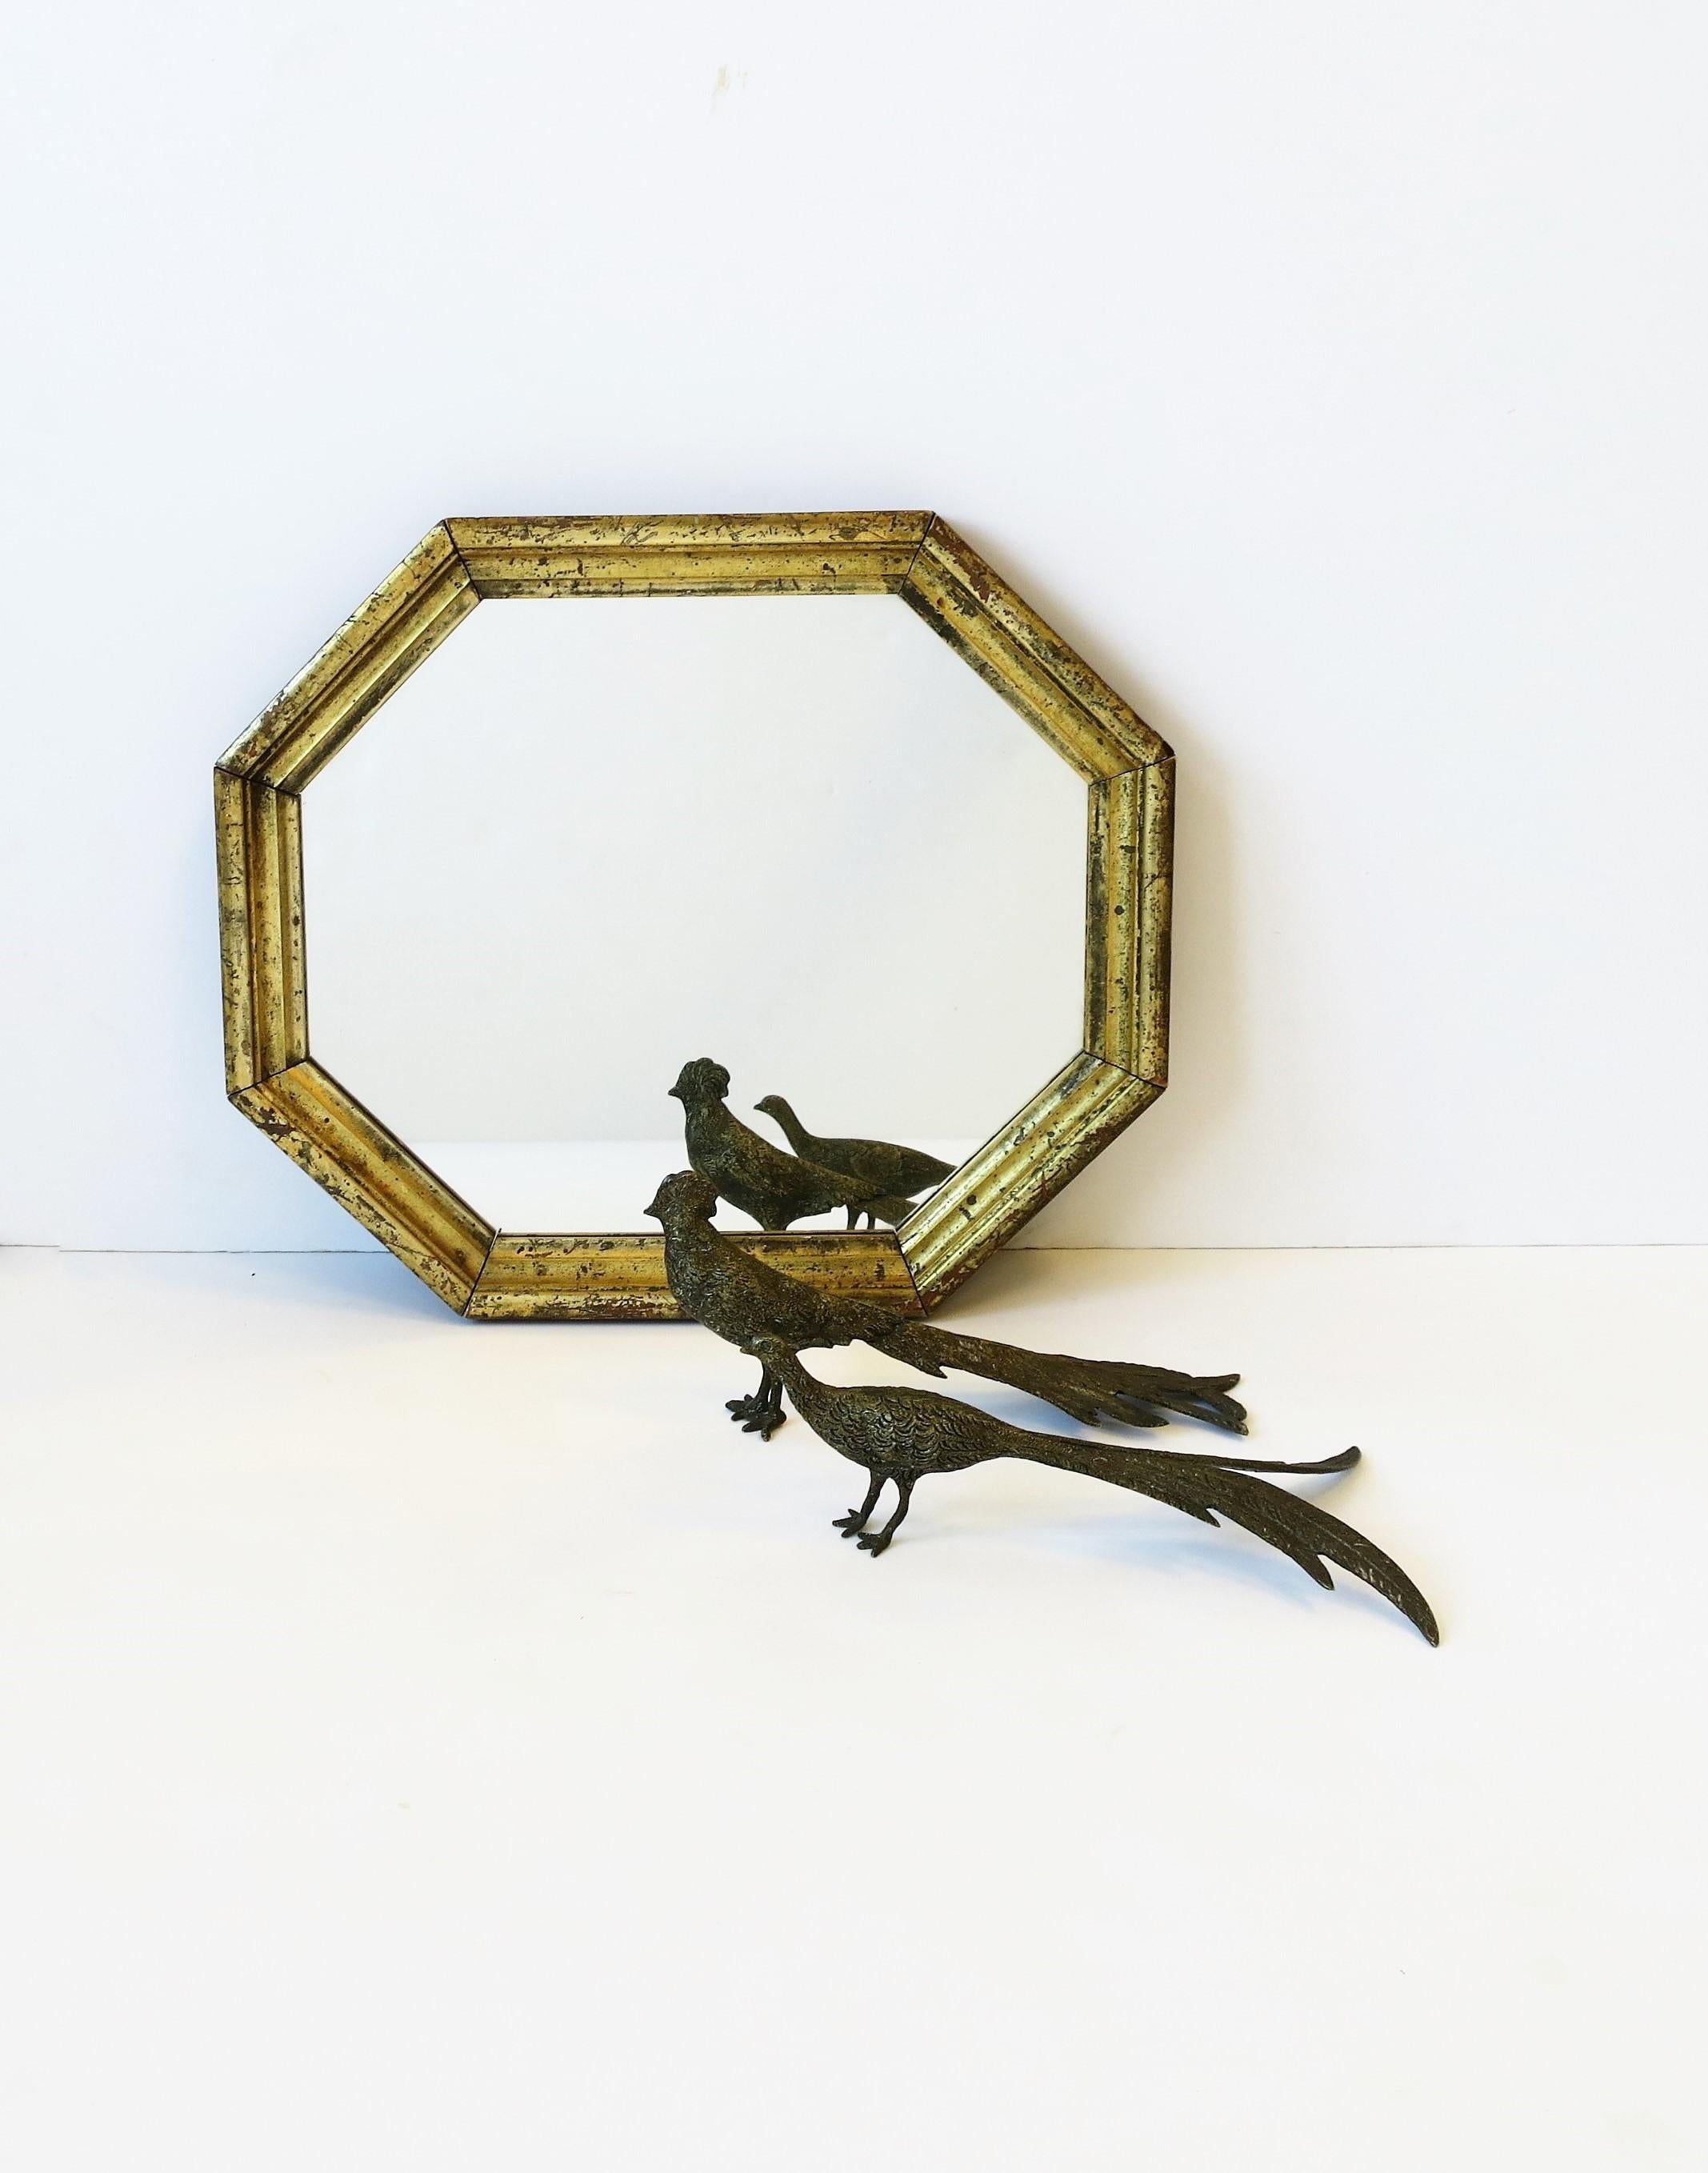 20th Century Peacock or Pheasent Birds Brass Decorative Objects, Pair